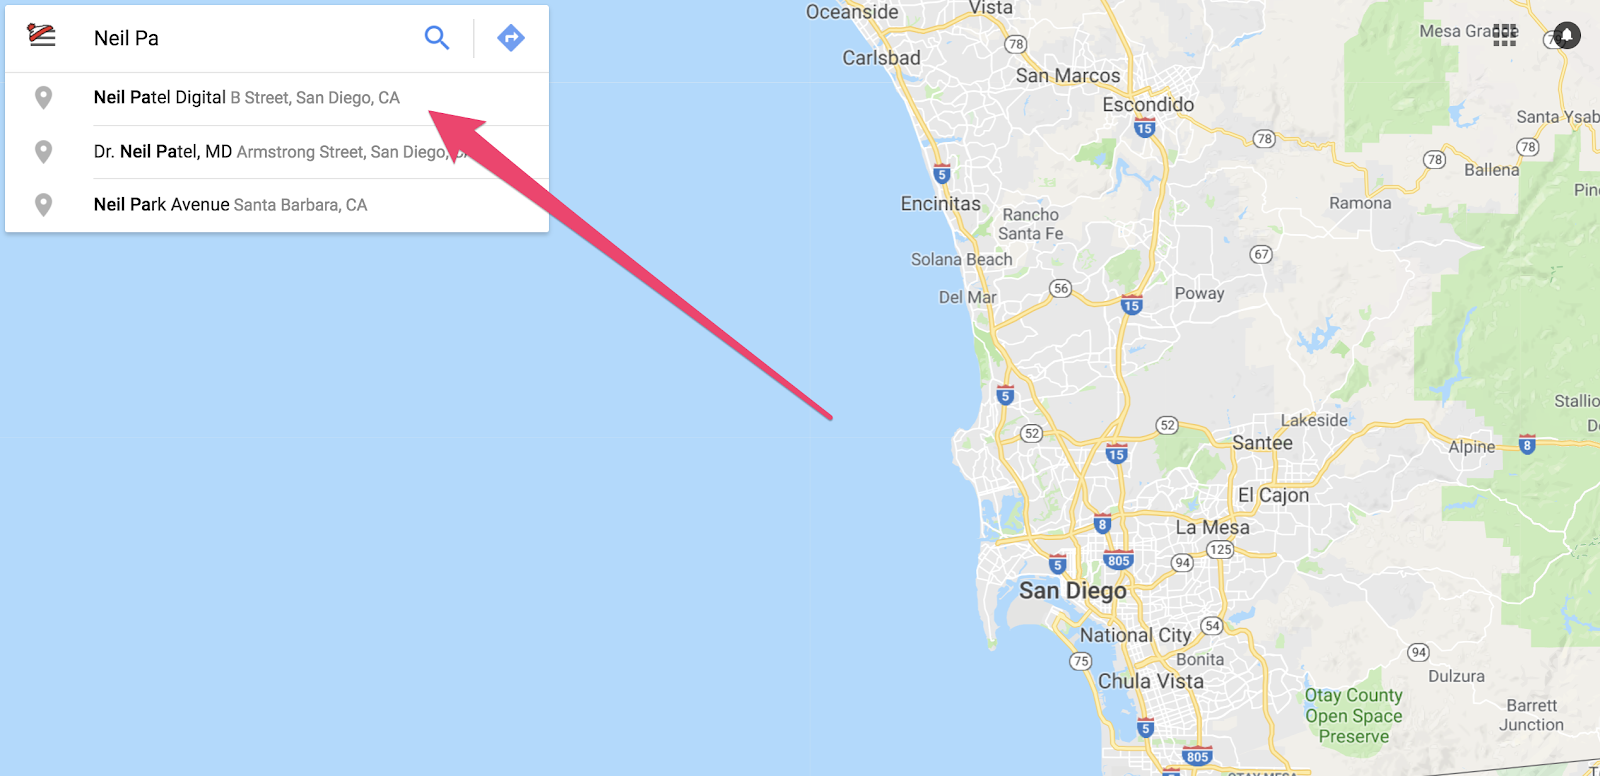 How to claim a business on Google using google maps (step 2)